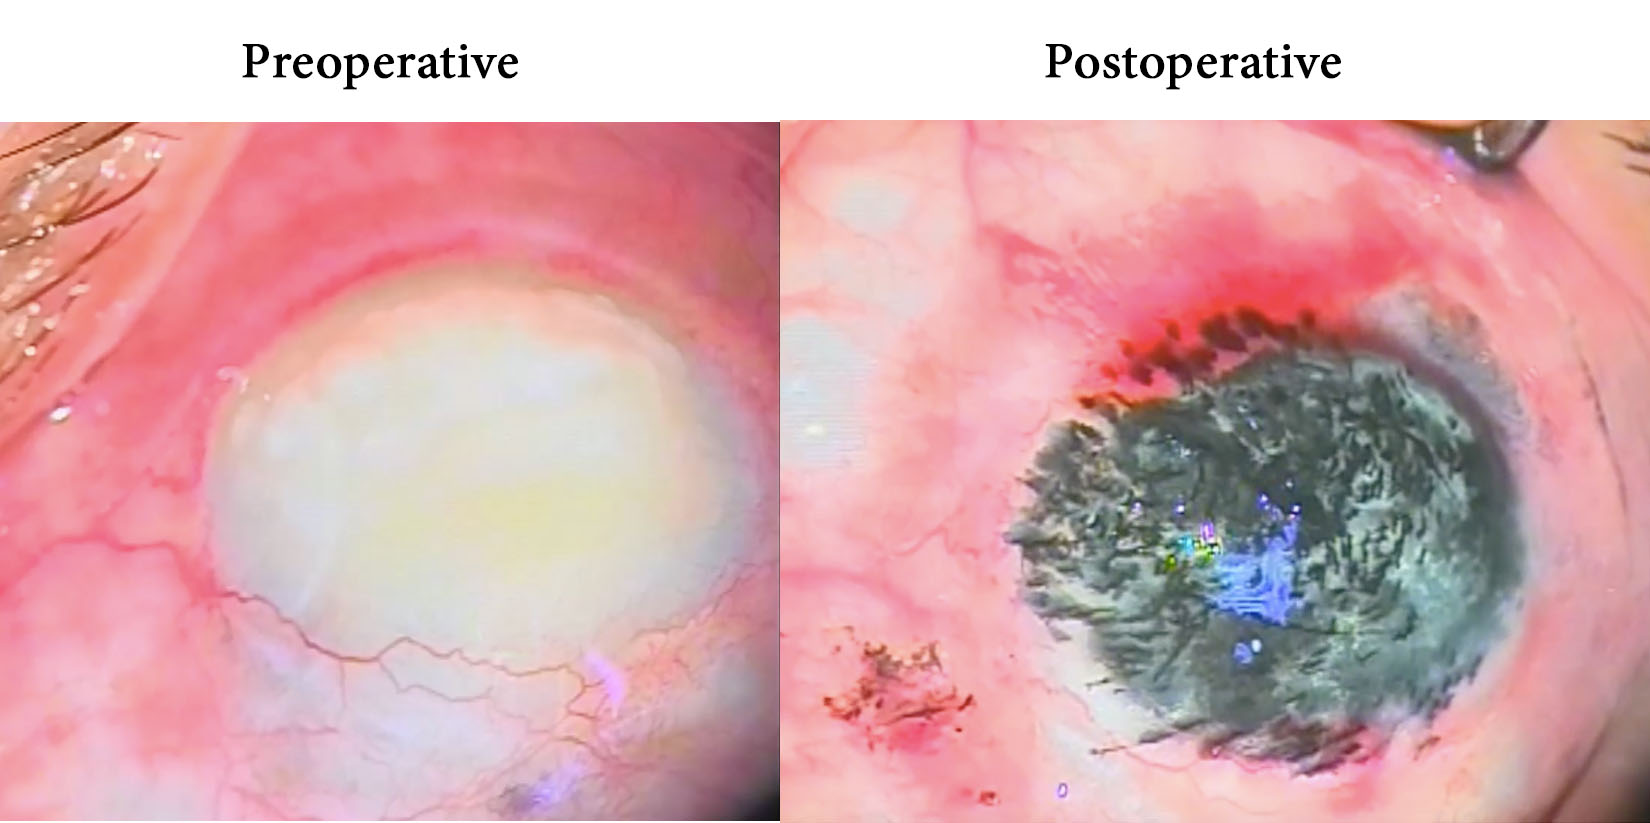 Outcomes of Corneal Tattooing by Rotring Painting Ink in Disfiguring Corneal Opacities